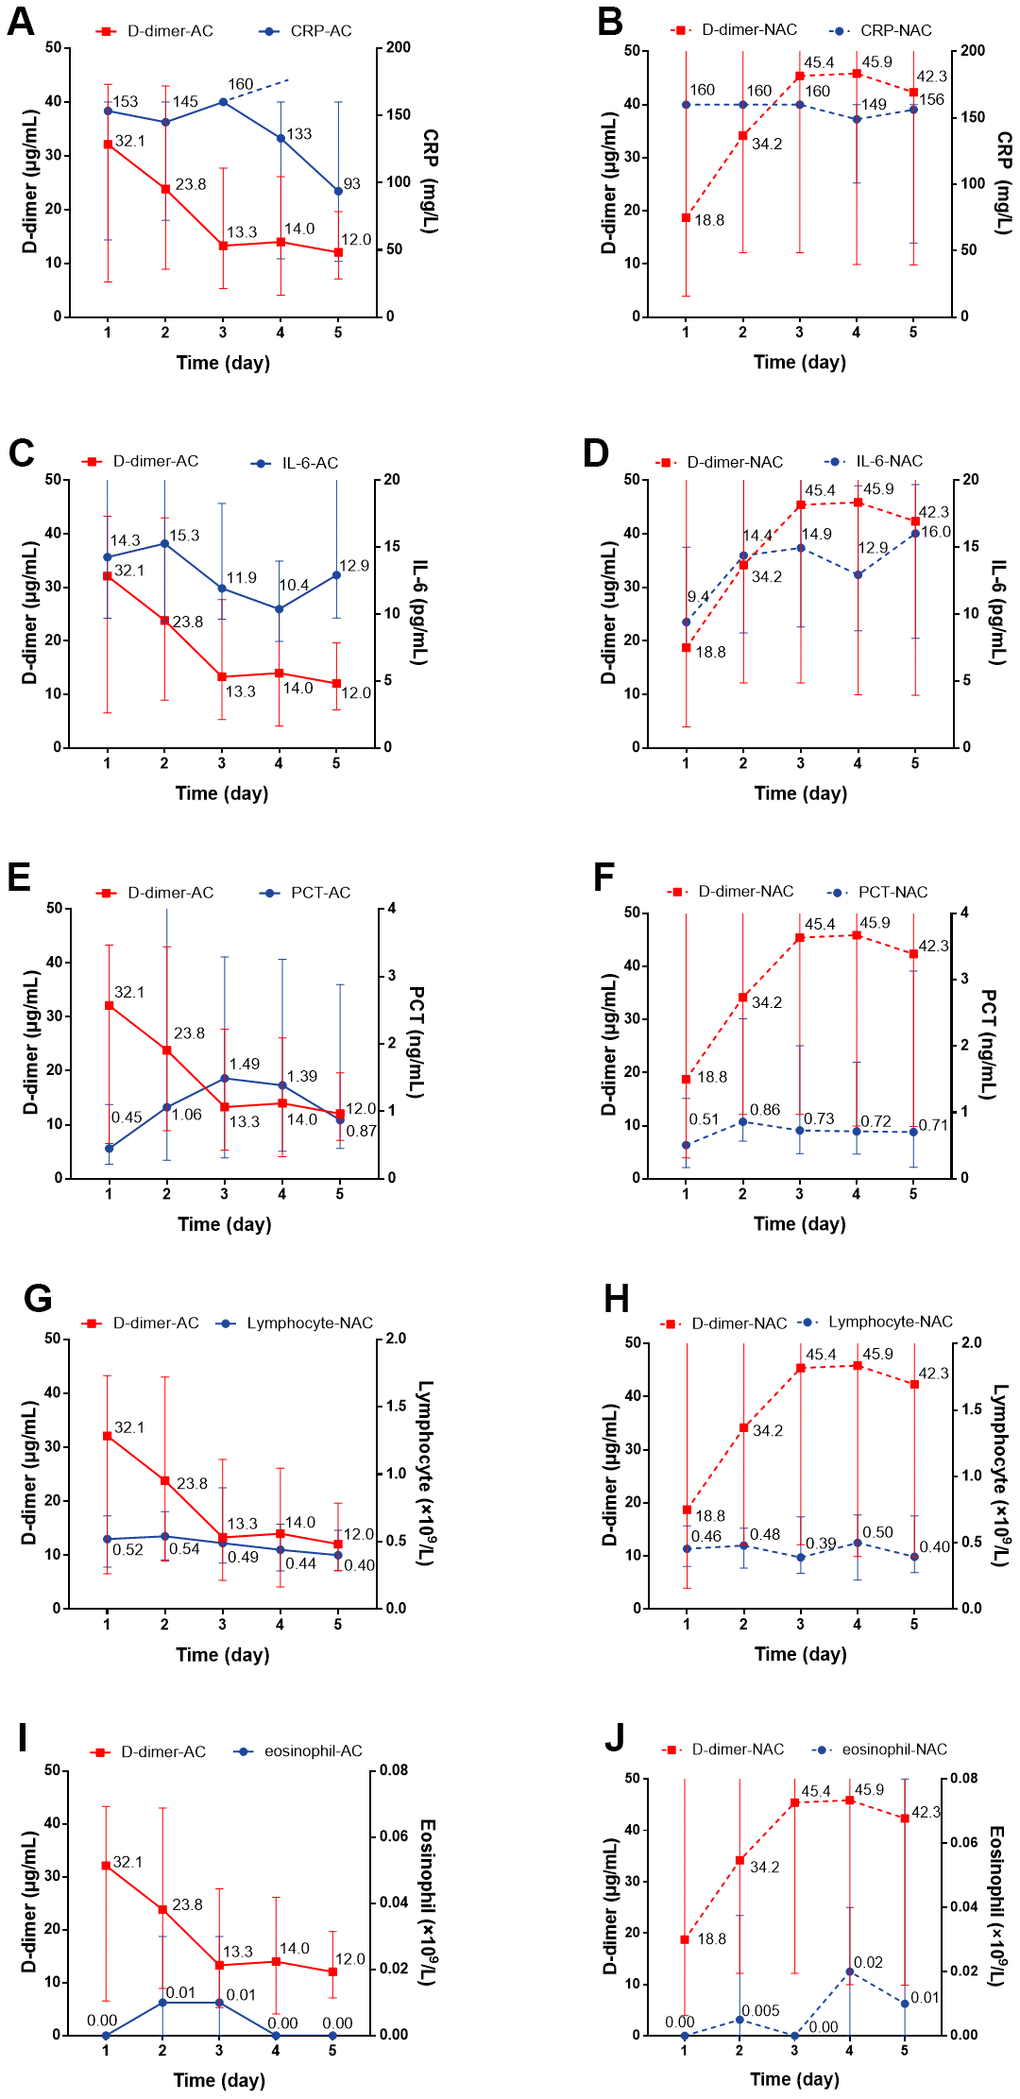 The dynamic changes over 5 consecutive days in inflammatory markers in critical type COVID-19 patients with or without anticoagulation treatment. (A, B) CRP; (C, D) IL-6; (E, F) PCT (G, H) Lymphocyte; (I, J) Eosinophil. All P values can be found in Supplementary Table 2. COVID-19: coronavirus disease 2019, NAC: non-anticoagulant; AC: anticoagulant, CRP: c-reactive protein, IL-6: Interleukin-6, PCT: procalcitonin.